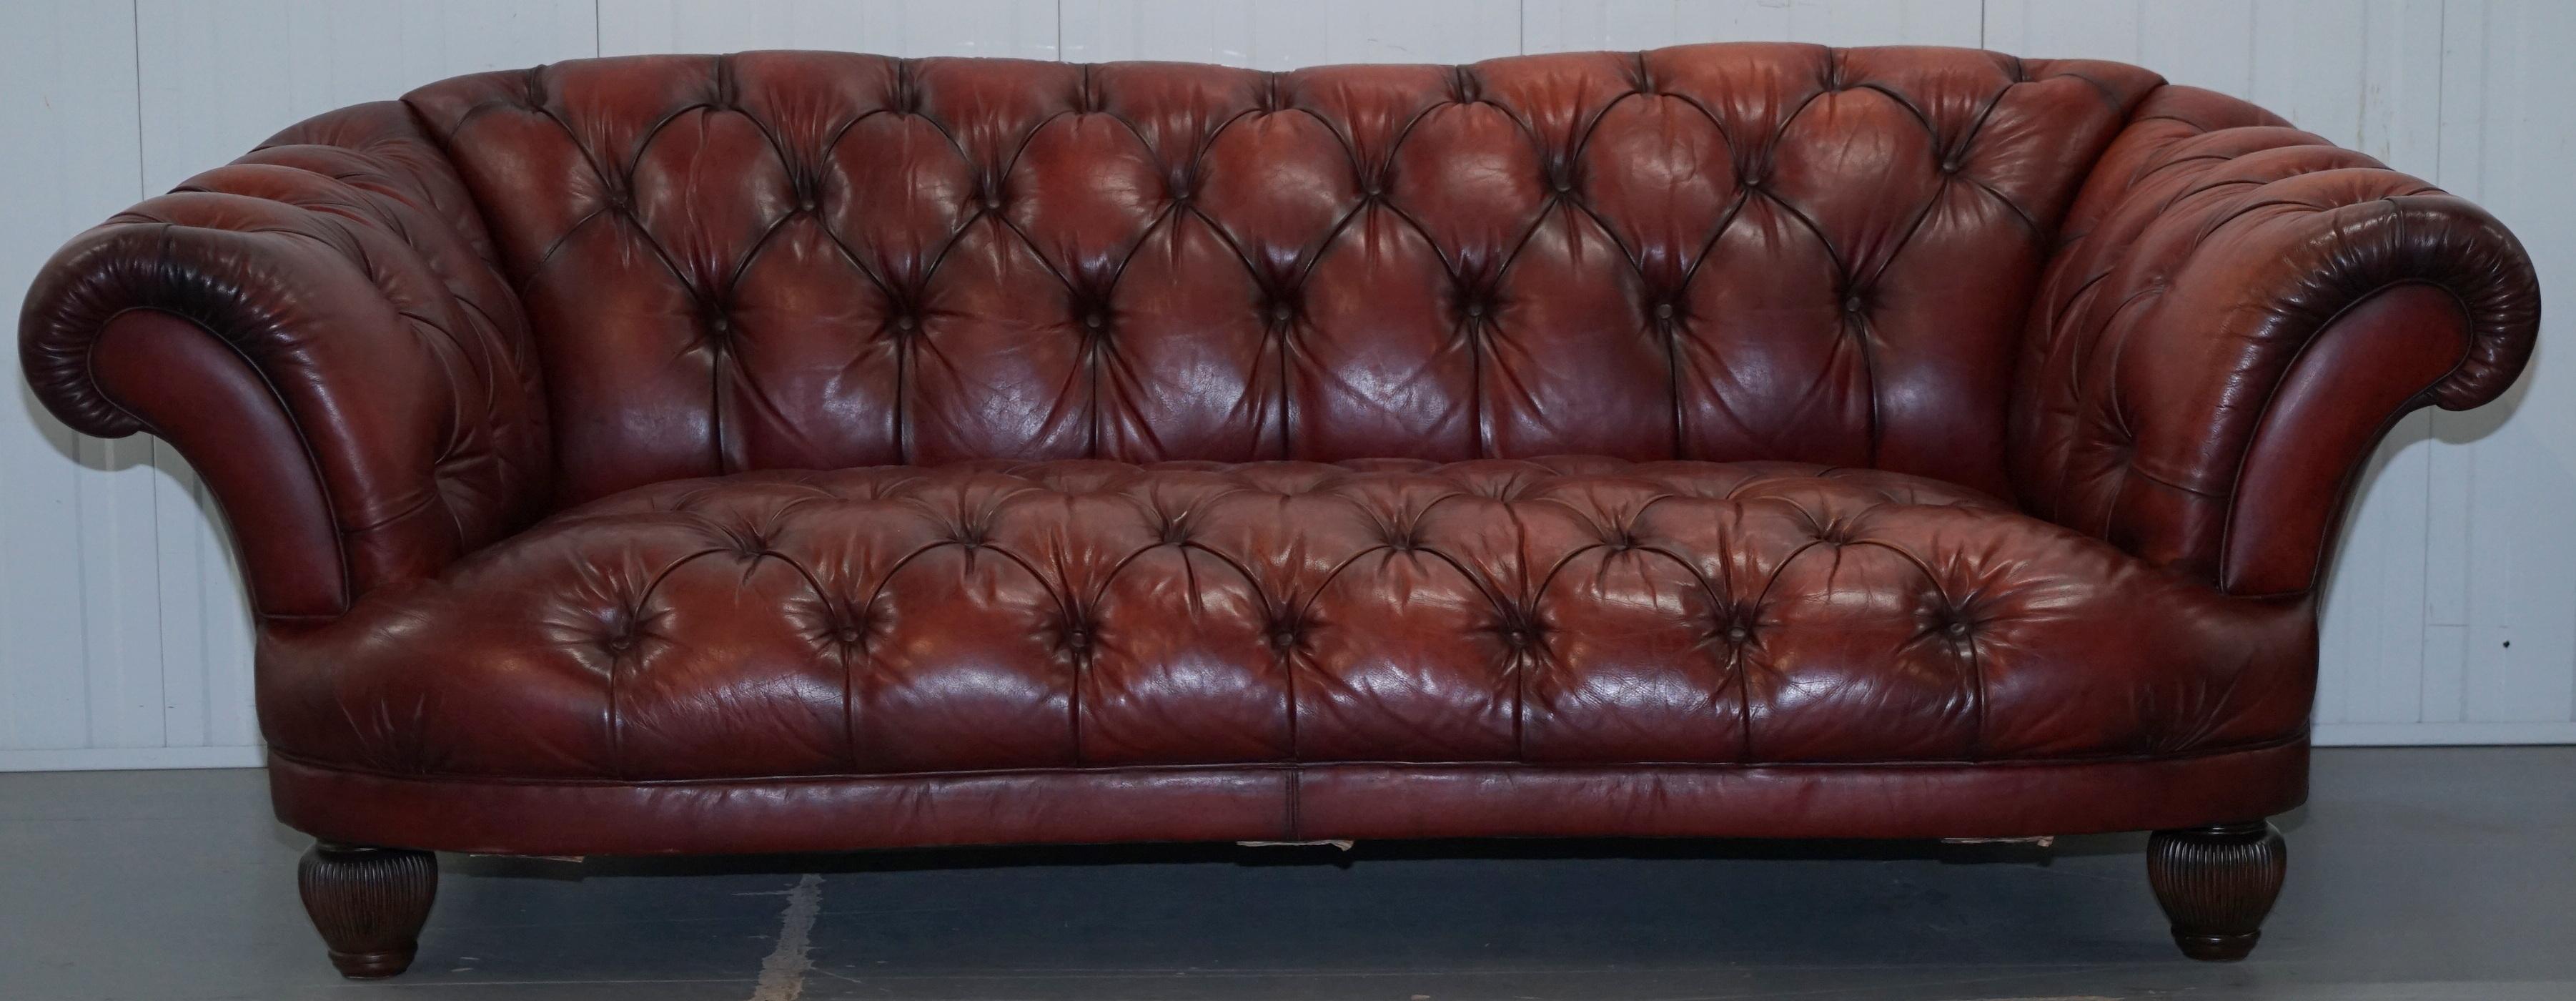 We are delighted to offer for sale this lovely Tetrad Oskar aged brown leather Chesterfield buttoned sofa

This range has to be one of Tetrads best ever selling lines, the style seems to fit effortlessly into any setting, everything is slightly